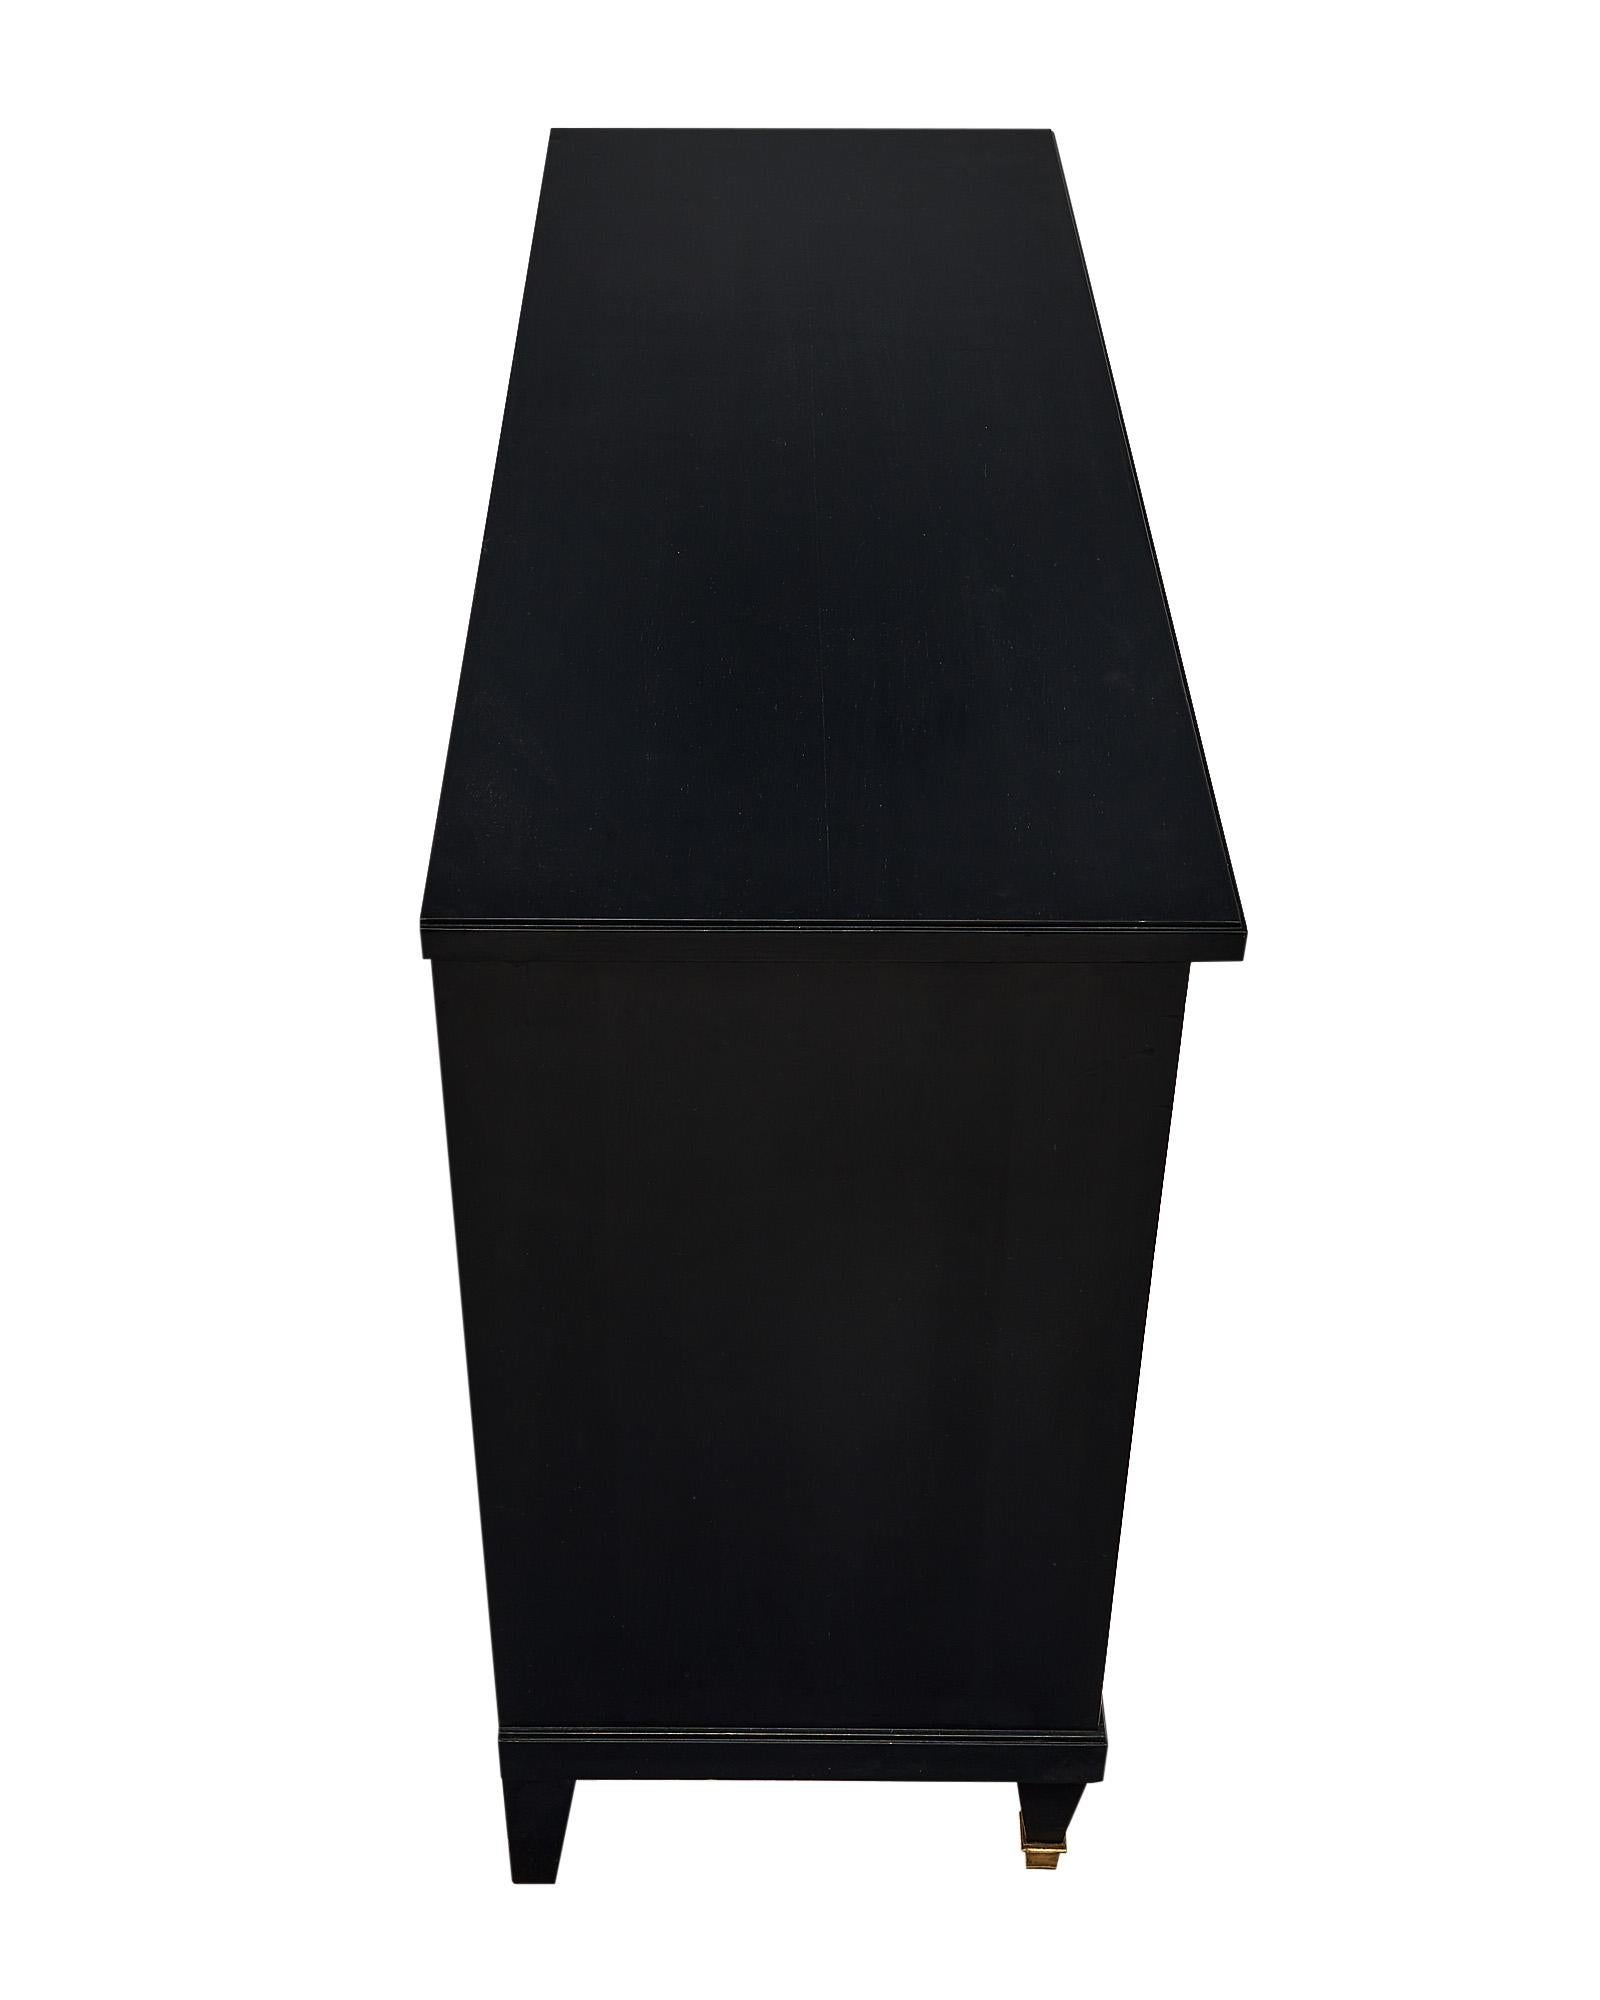 Directoire Style Ebonized Chest of Drawers For Sale 2